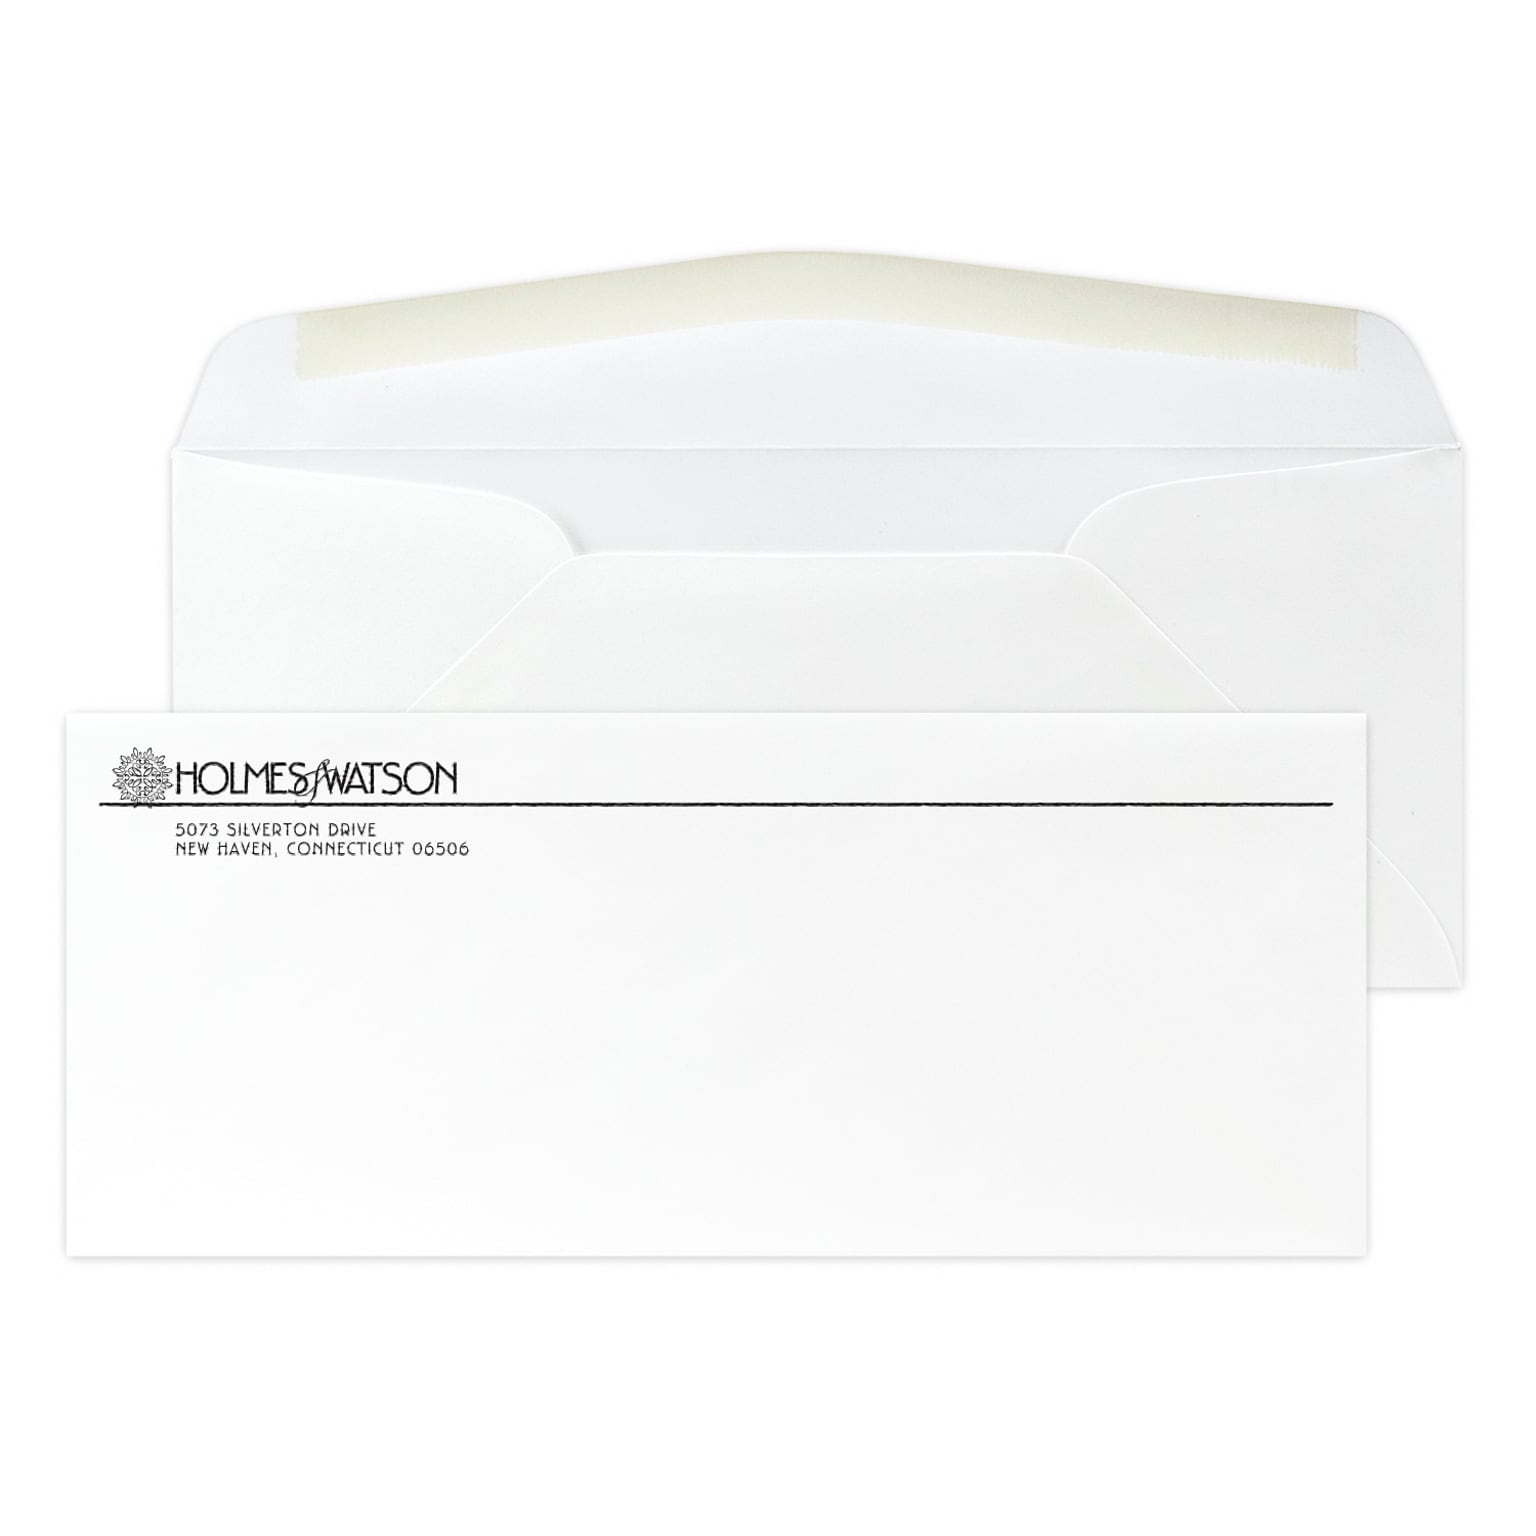 Custom #10 Stationery Envelopes, 4 1/4 x 9 1/2, 70# Cougar Opaque Smooth White, 1 Standard Raised Ink, 250 / Pack